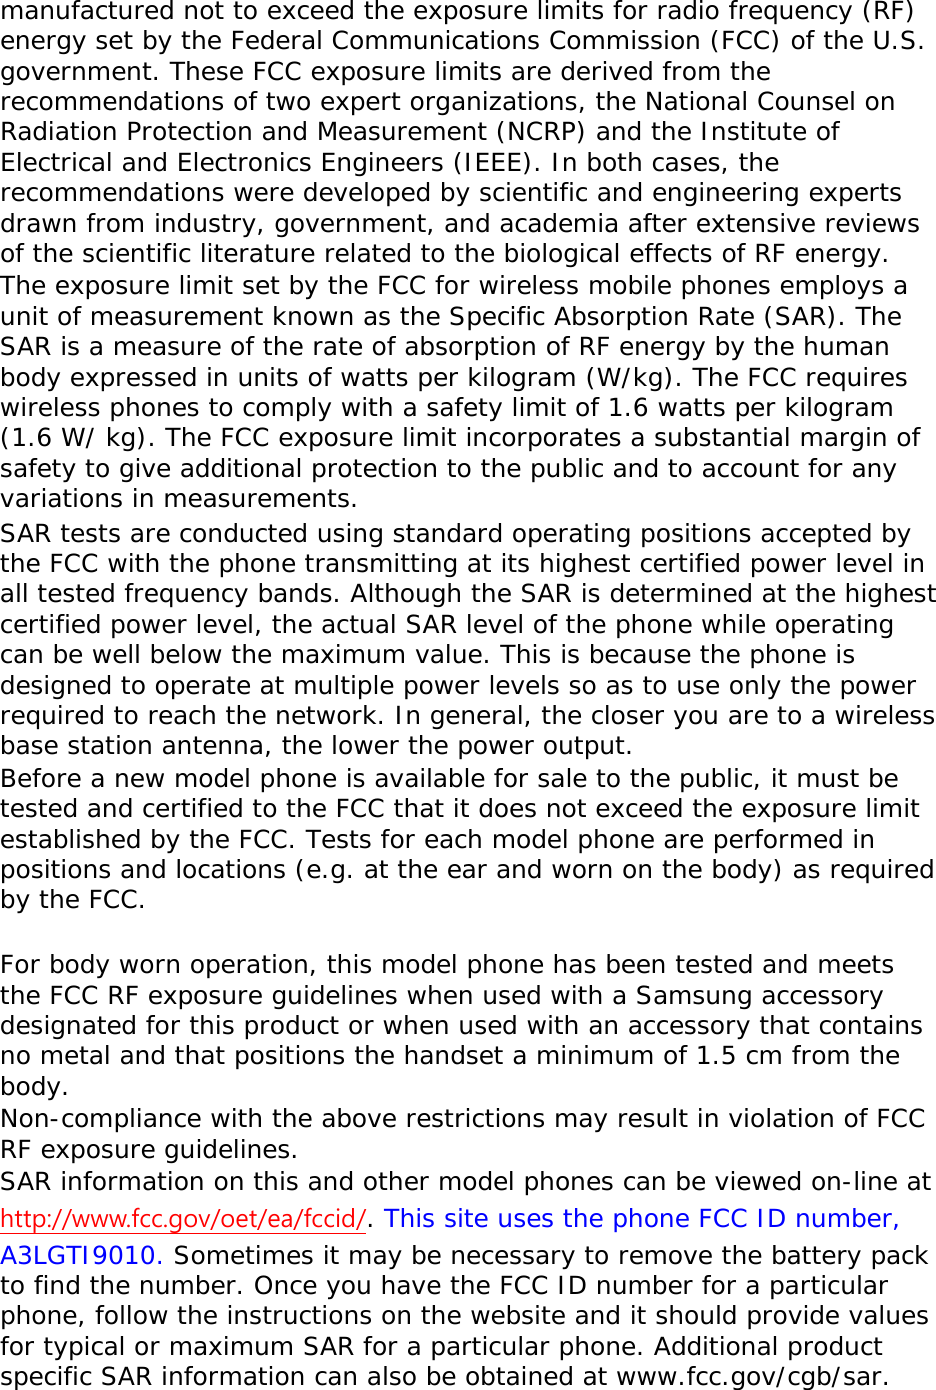 manufactured not to exceed the exposure limits for radio frequency (RF) energy set by the Federal Communications Commission (FCC) of the U.S. government. These FCC exposure limits are derived from the recommendations of two expert organizations, the National Counsel on Radiation Protection and Measurement (NCRP) and the Institute of Electrical and Electronics Engineers (IEEE). In both cases, the recommendations were developed by scientific and engineering experts drawn from industry, government, and academia after extensive reviews of the scientific literature related to the biological effects of RF energy. The exposure limit set by the FCC for wireless mobile phones employs a unit of measurement known as the Specific Absorption Rate (SAR). The SAR is a measure of the rate of absorption of RF energy by the human body expressed in units of watts per kilogram (W/kg). The FCC requires wireless phones to comply with a safety limit of 1.6 watts per kilogram (1.6 W/ kg). The FCC exposure limit incorporates a substantial margin of safety to give additional protection to the public and to account for any variations in measurements. SAR tests are conducted using standard operating positions accepted by the FCC with the phone transmitting at its highest certified power level in all tested frequency bands. Although the SAR is determined at the highest certified power level, the actual SAR level of the phone while operating can be well below the maximum value. This is because the phone is designed to operate at multiple power levels so as to use only the power required to reach the network. In general, the closer you are to a wireless base station antenna, the lower the power output. Before a new model phone is available for sale to the public, it must be tested and certified to the FCC that it does not exceed the exposure limit established by the FCC. Tests for each model phone are performed in positions and locations (e.g. at the ear and worn on the body) as required by the FCC.    For body worn operation, this model phone has been tested and meets the FCC RF exposure guidelines when used with a Samsung accessory designated for this product or when used with an accessory that contains no metal and that positions the handset a minimum of 1.5 cm from the body.  Non-compliance with the above restrictions may result in violation of FCC RF exposure guidelines. SAR information on this and other model phones can be viewed on-line at http://www.fcc.gov/oet/ea/fccid/. This site uses the phone FCC ID number, A3LGTI9010. Sometimes it may be necessary to remove the battery pack to find the number. Once you have the FCC ID number for a particular phone, follow the instructions on the website and it should provide values for typical or maximum SAR for a particular phone. Additional product specific SAR information can also be obtained at www.fcc.gov/cgb/sar. 